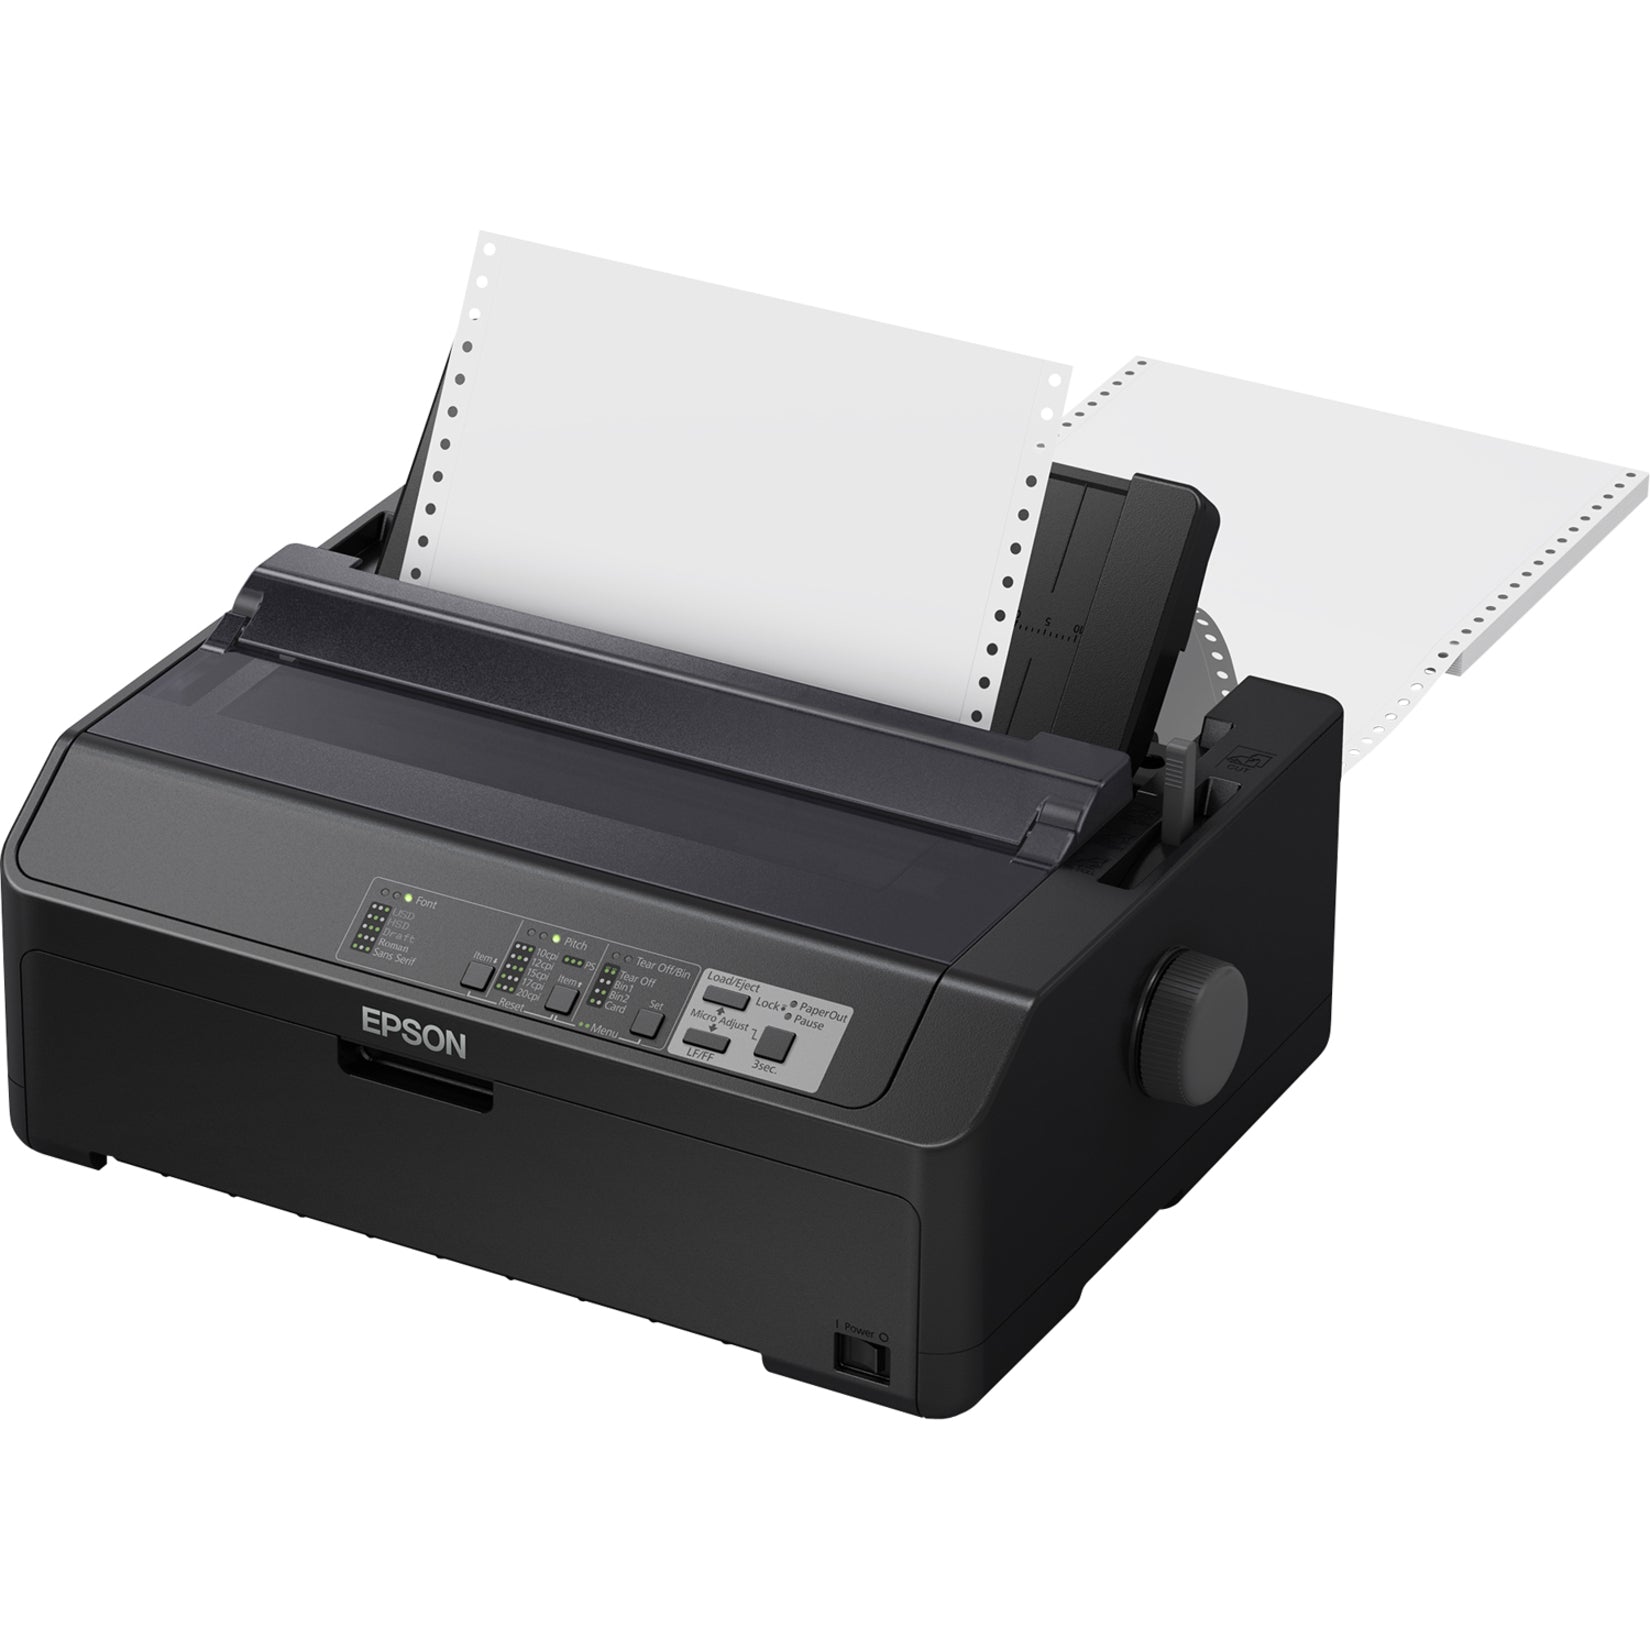 Epson C11CF37202 FX-890II Impact Printer, Durable and Easy to Use, 3-Year Warranty, High-Speed Printing